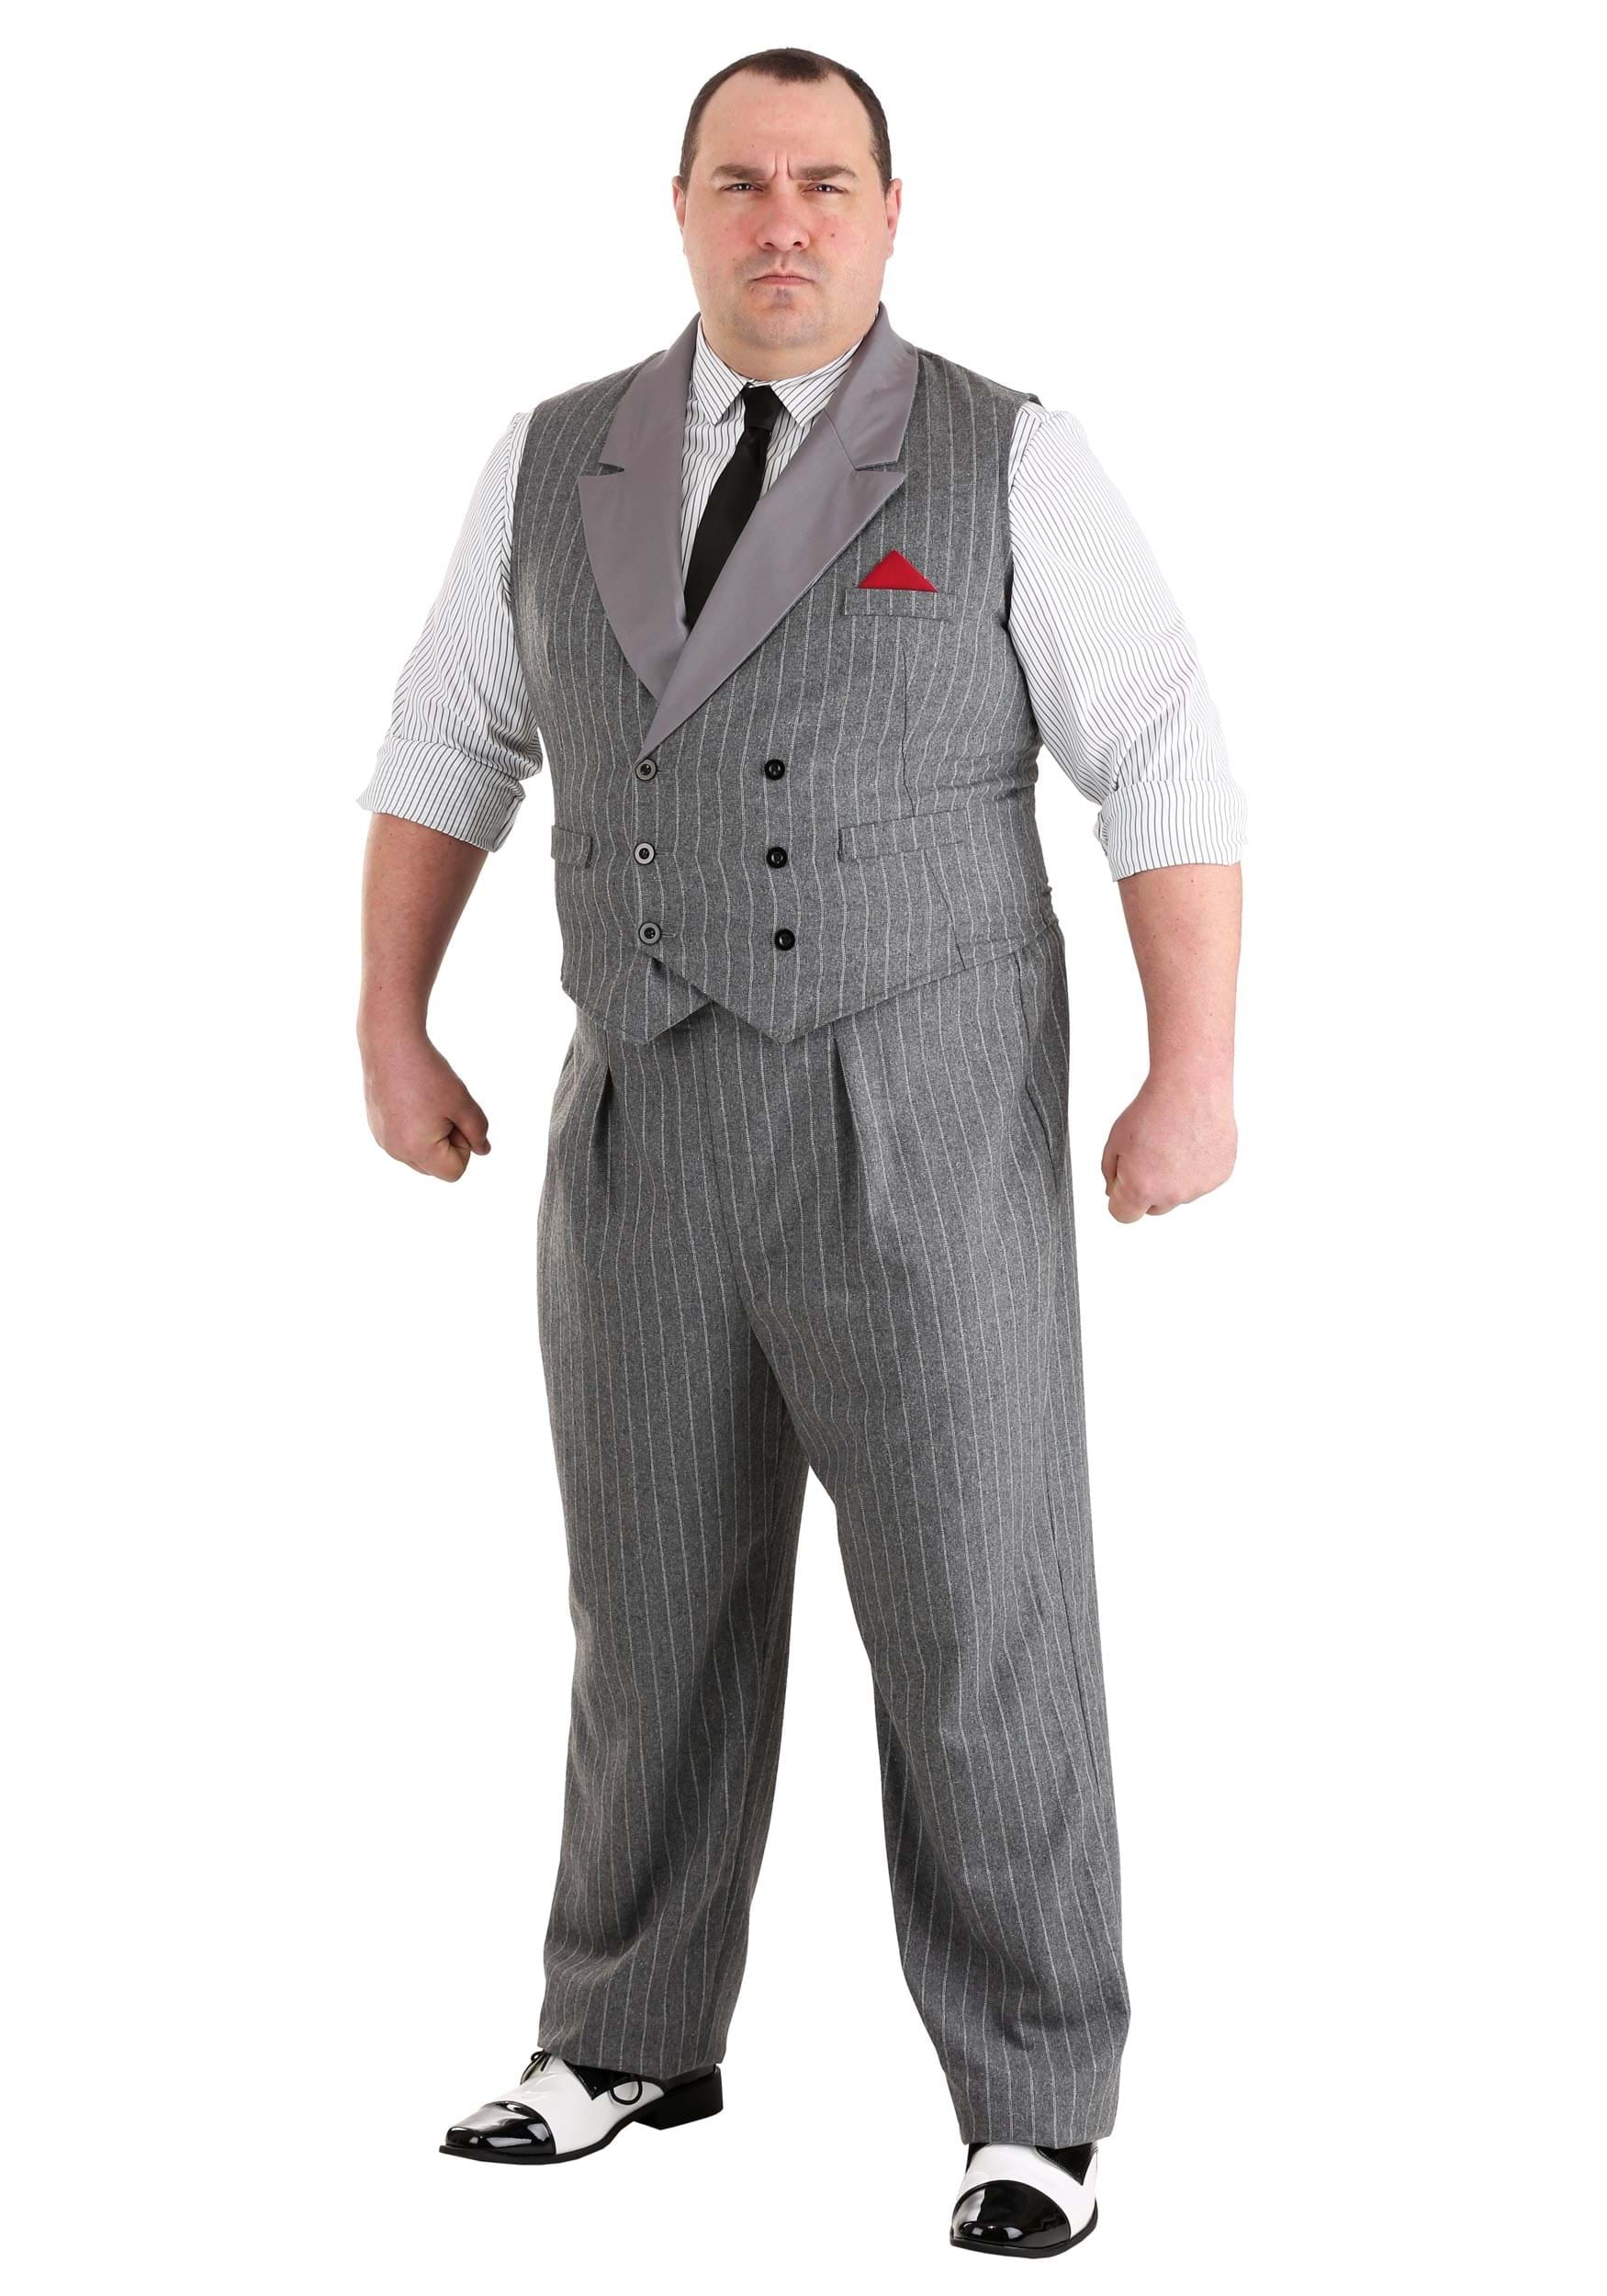 Mens Plus Size Ruthless Gangster Costume 